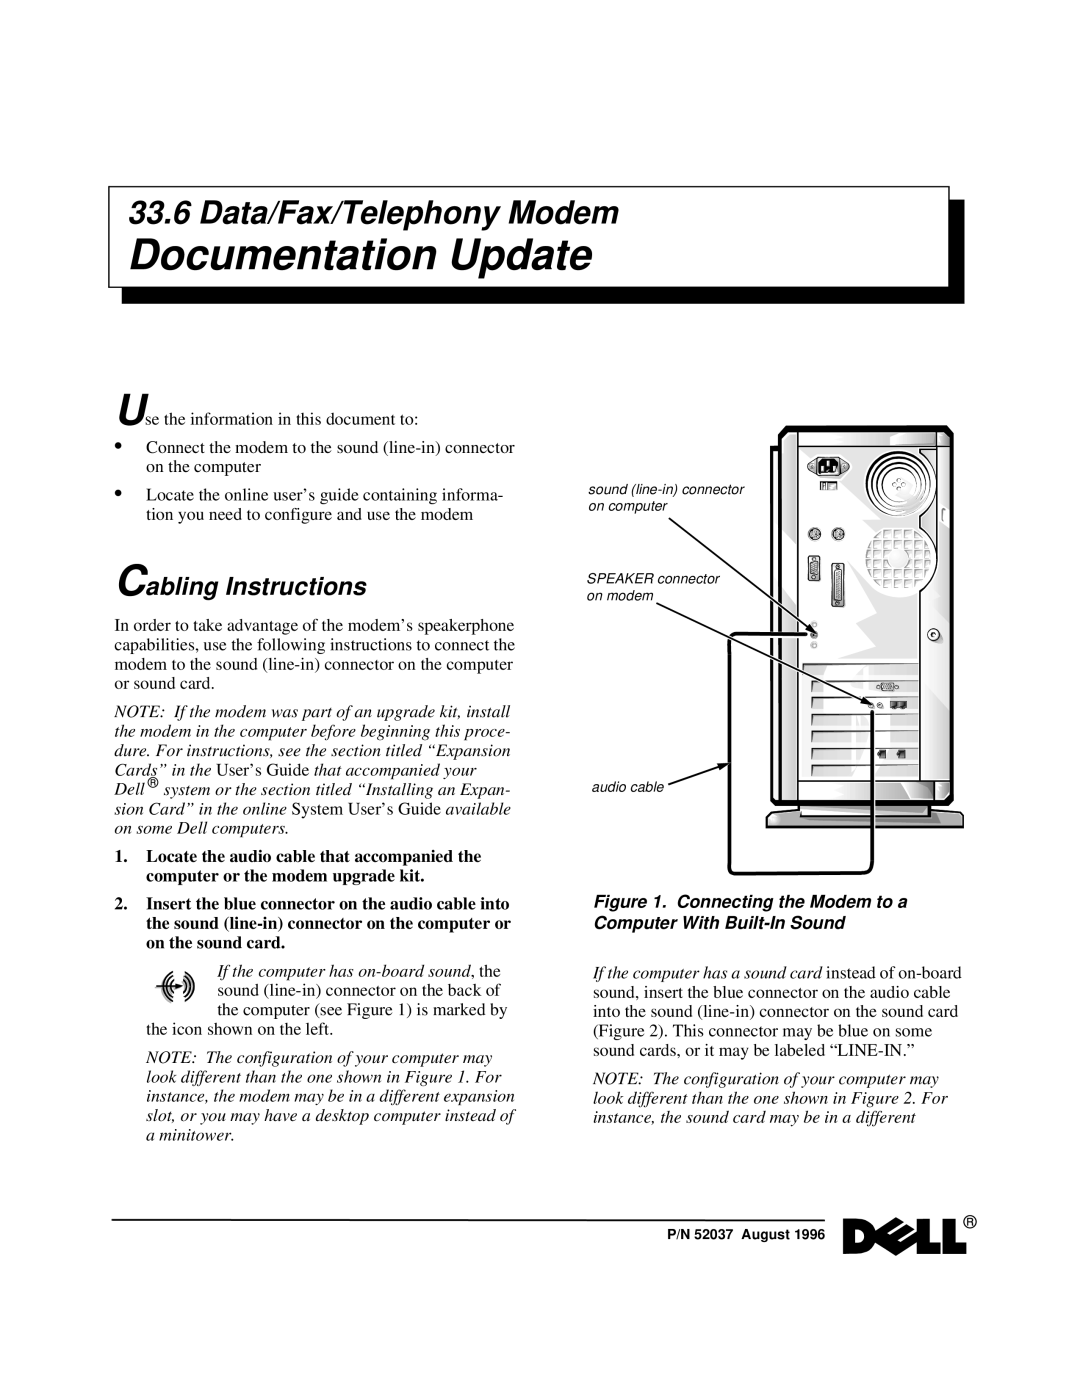 Dell P/N 52037 manual Cabling Instructions, Connecting the Modem to a Computer With Built-In Sound, Documentation Update 